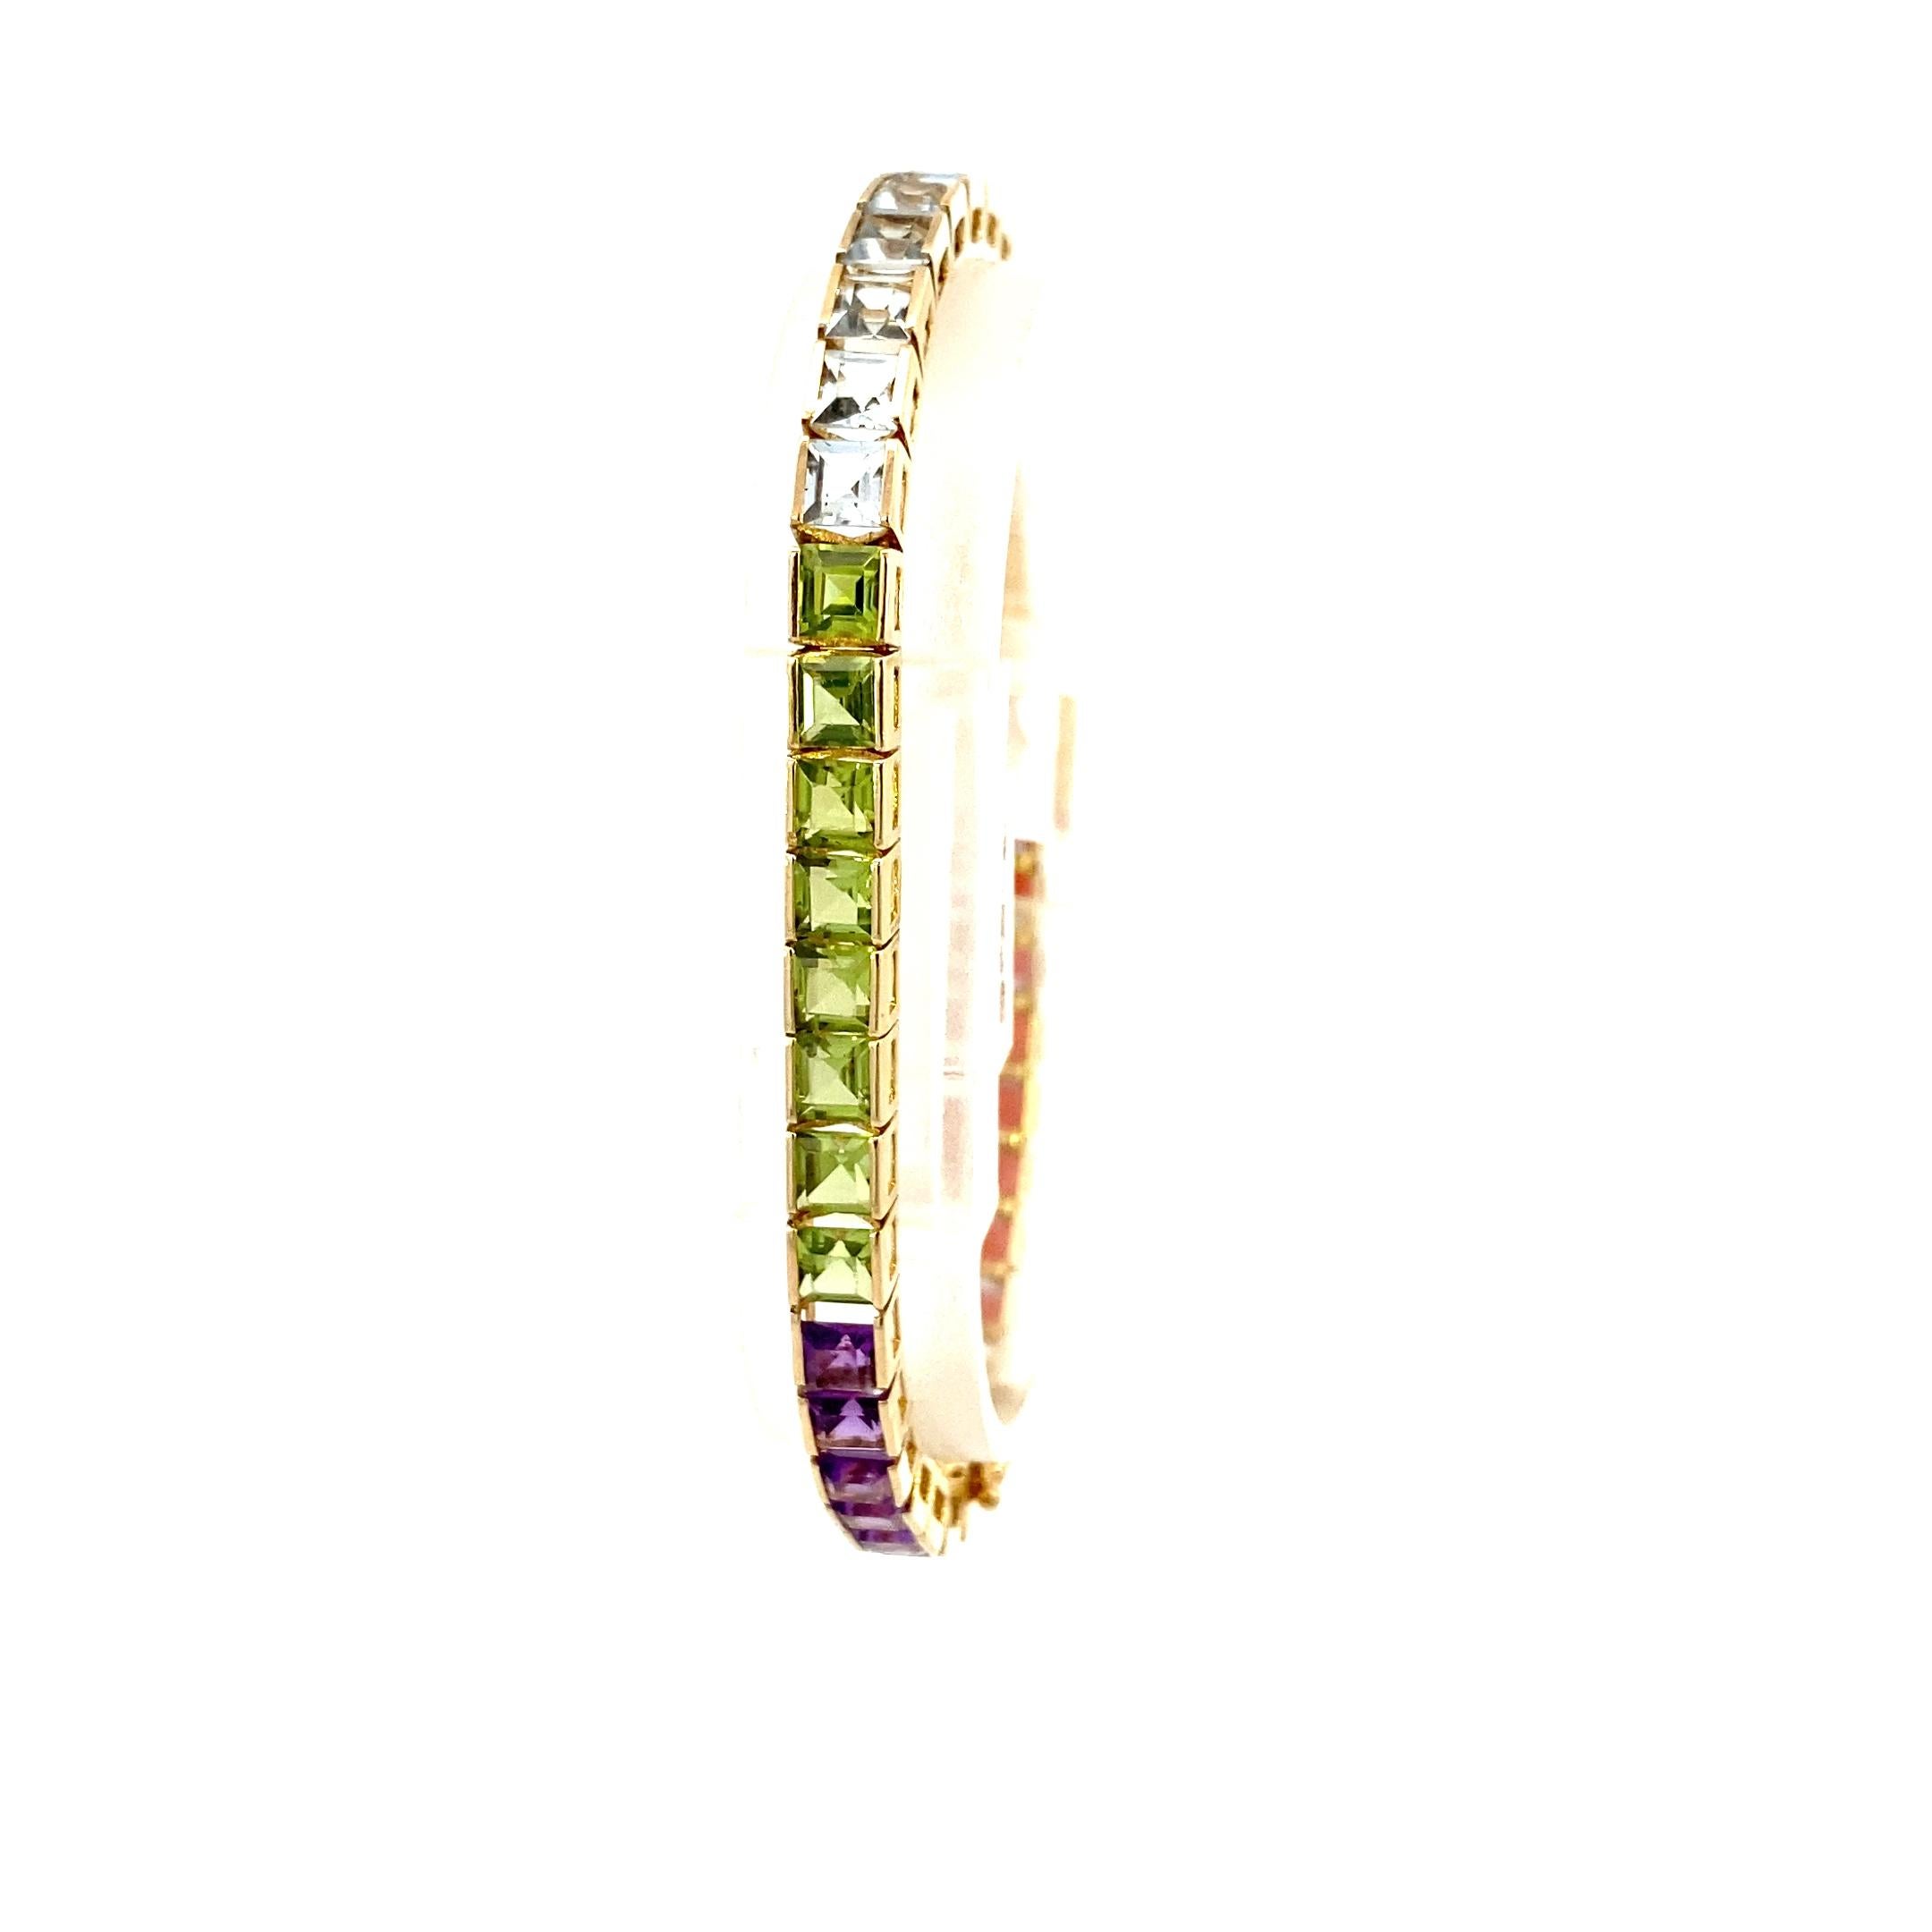 Vintage Rainbow Semi-Precious Stone Yellow Gold Bracelet. This stunning 7 inch long vintage rainbow of color bracelet has 41 square step cut stones in five different colors and stone types! From one end to the other there are 4.5 carat total weight